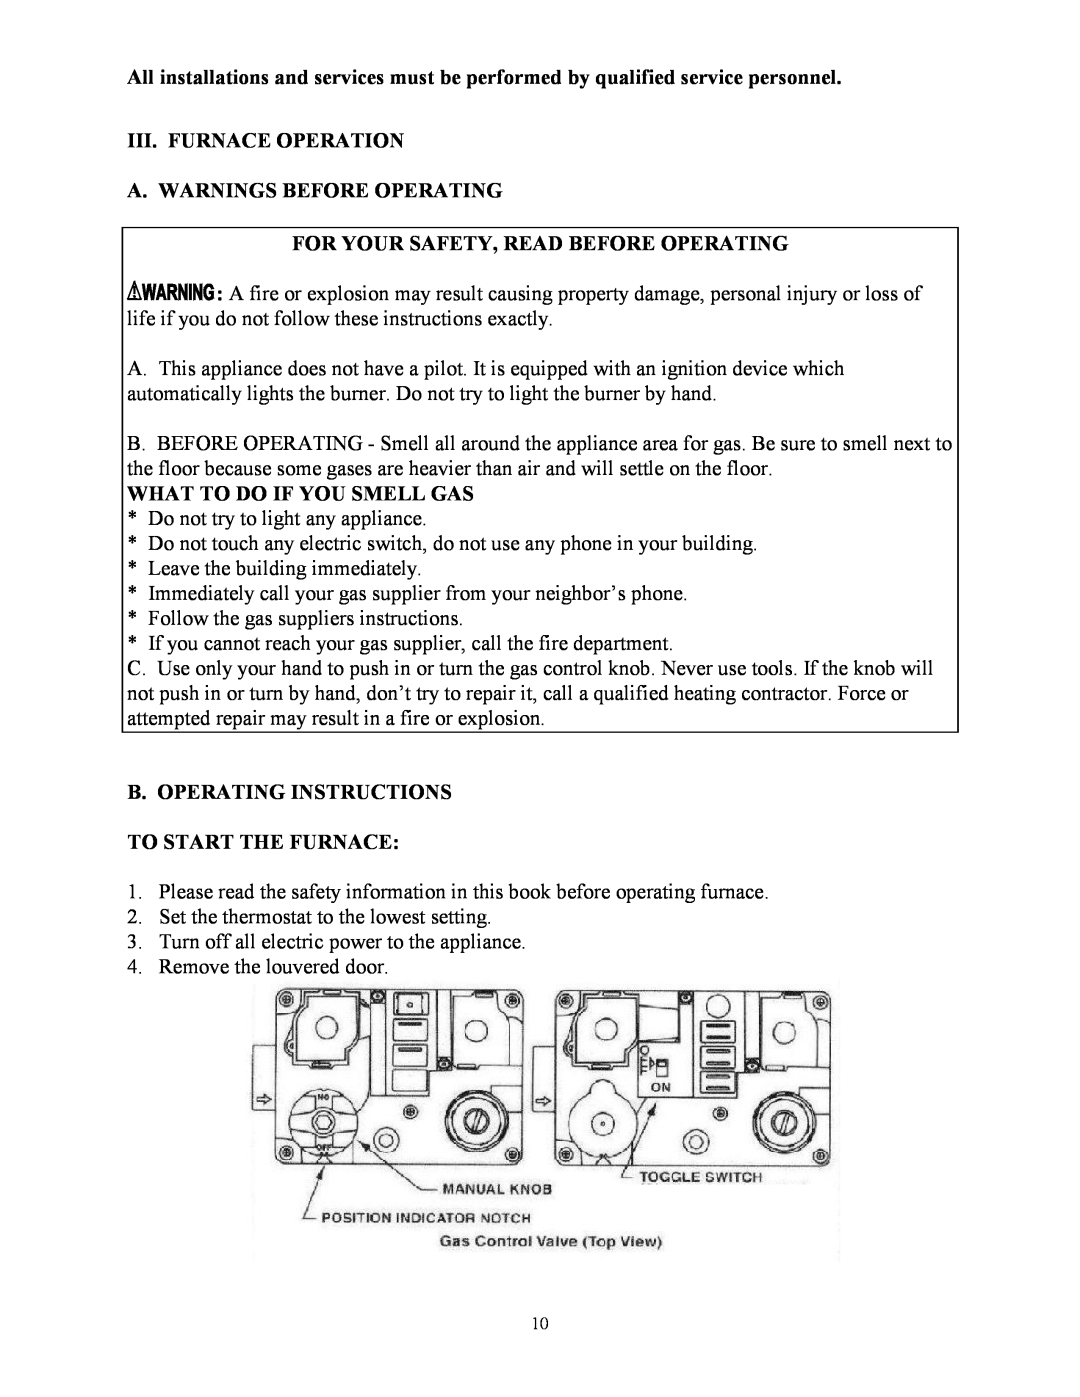 Thermo Products CDX1-75 manual Iii. Furnace Operation, A. Warnings Before Operating, For Your Safety, Read Before Operating 